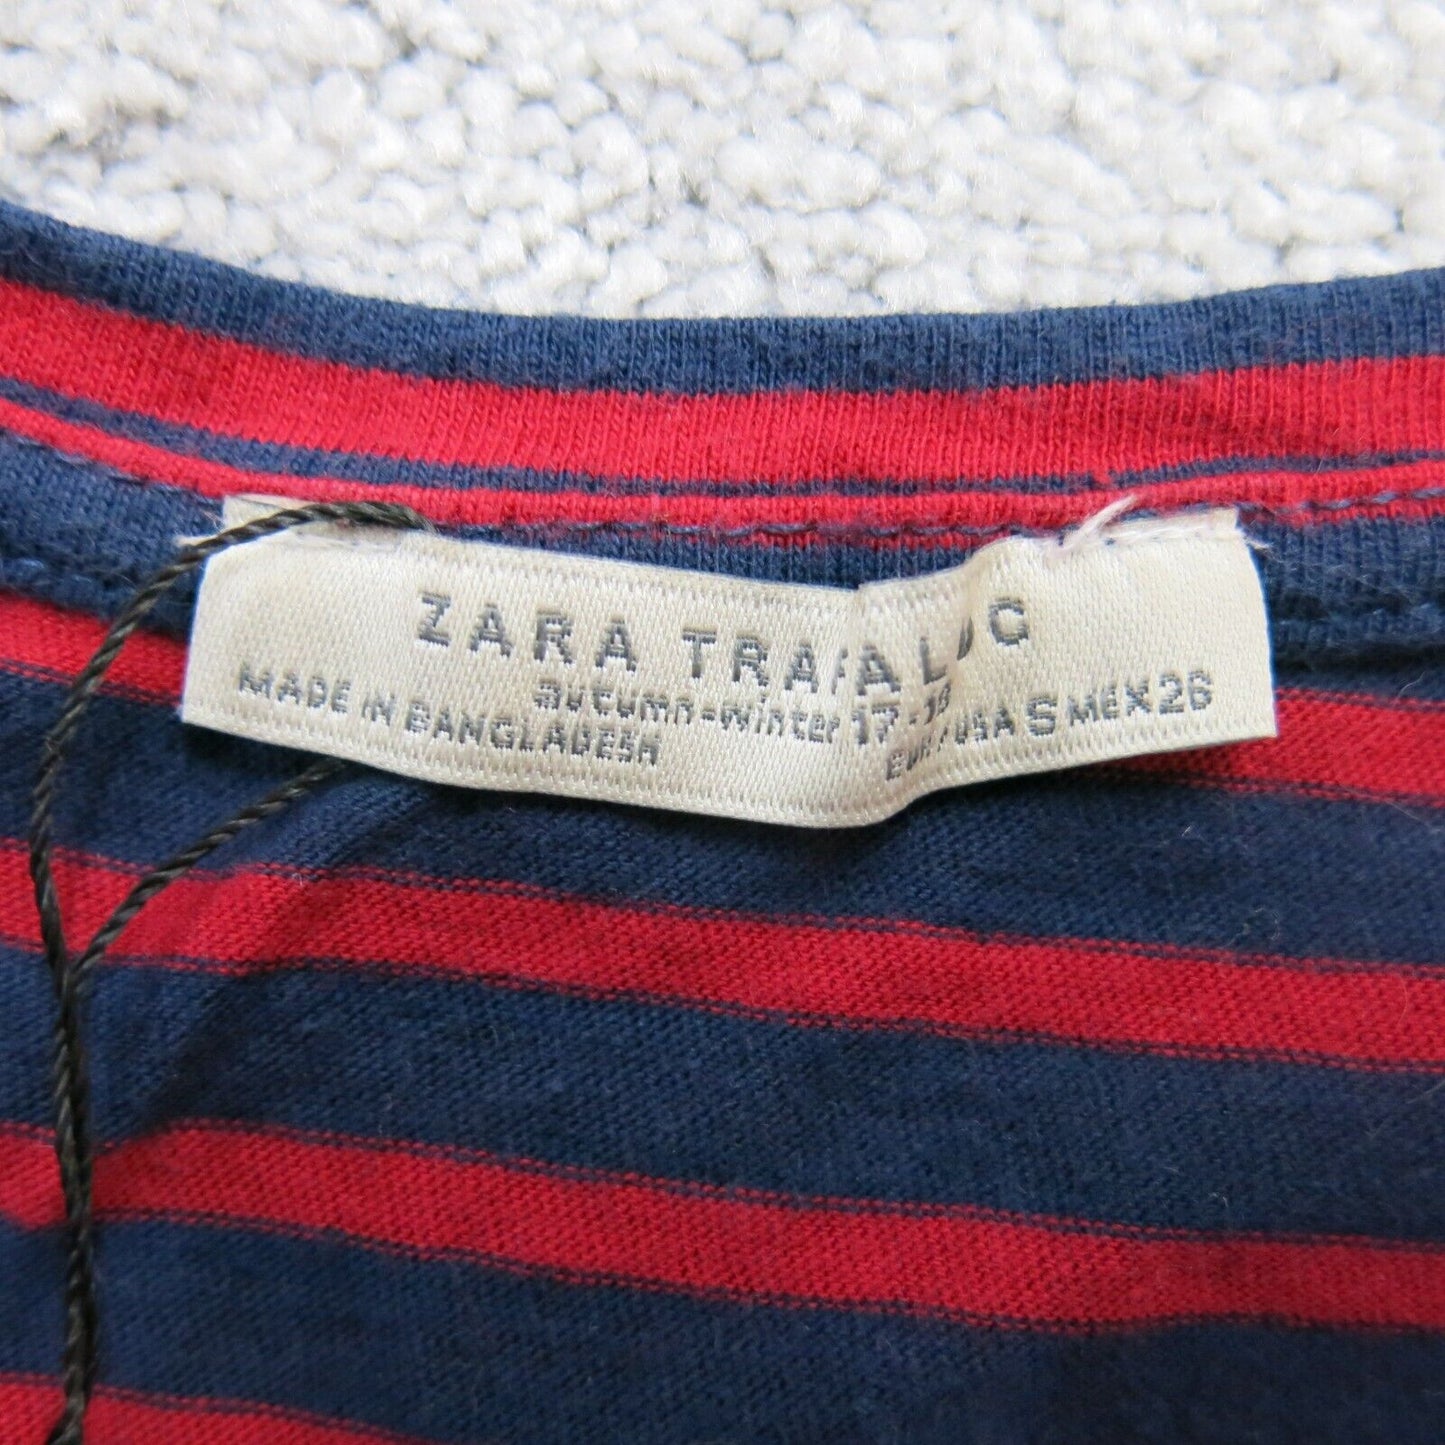 Zara Womens V Neck T Shirt Top Short Sleeves Striped Red Blue Size Small